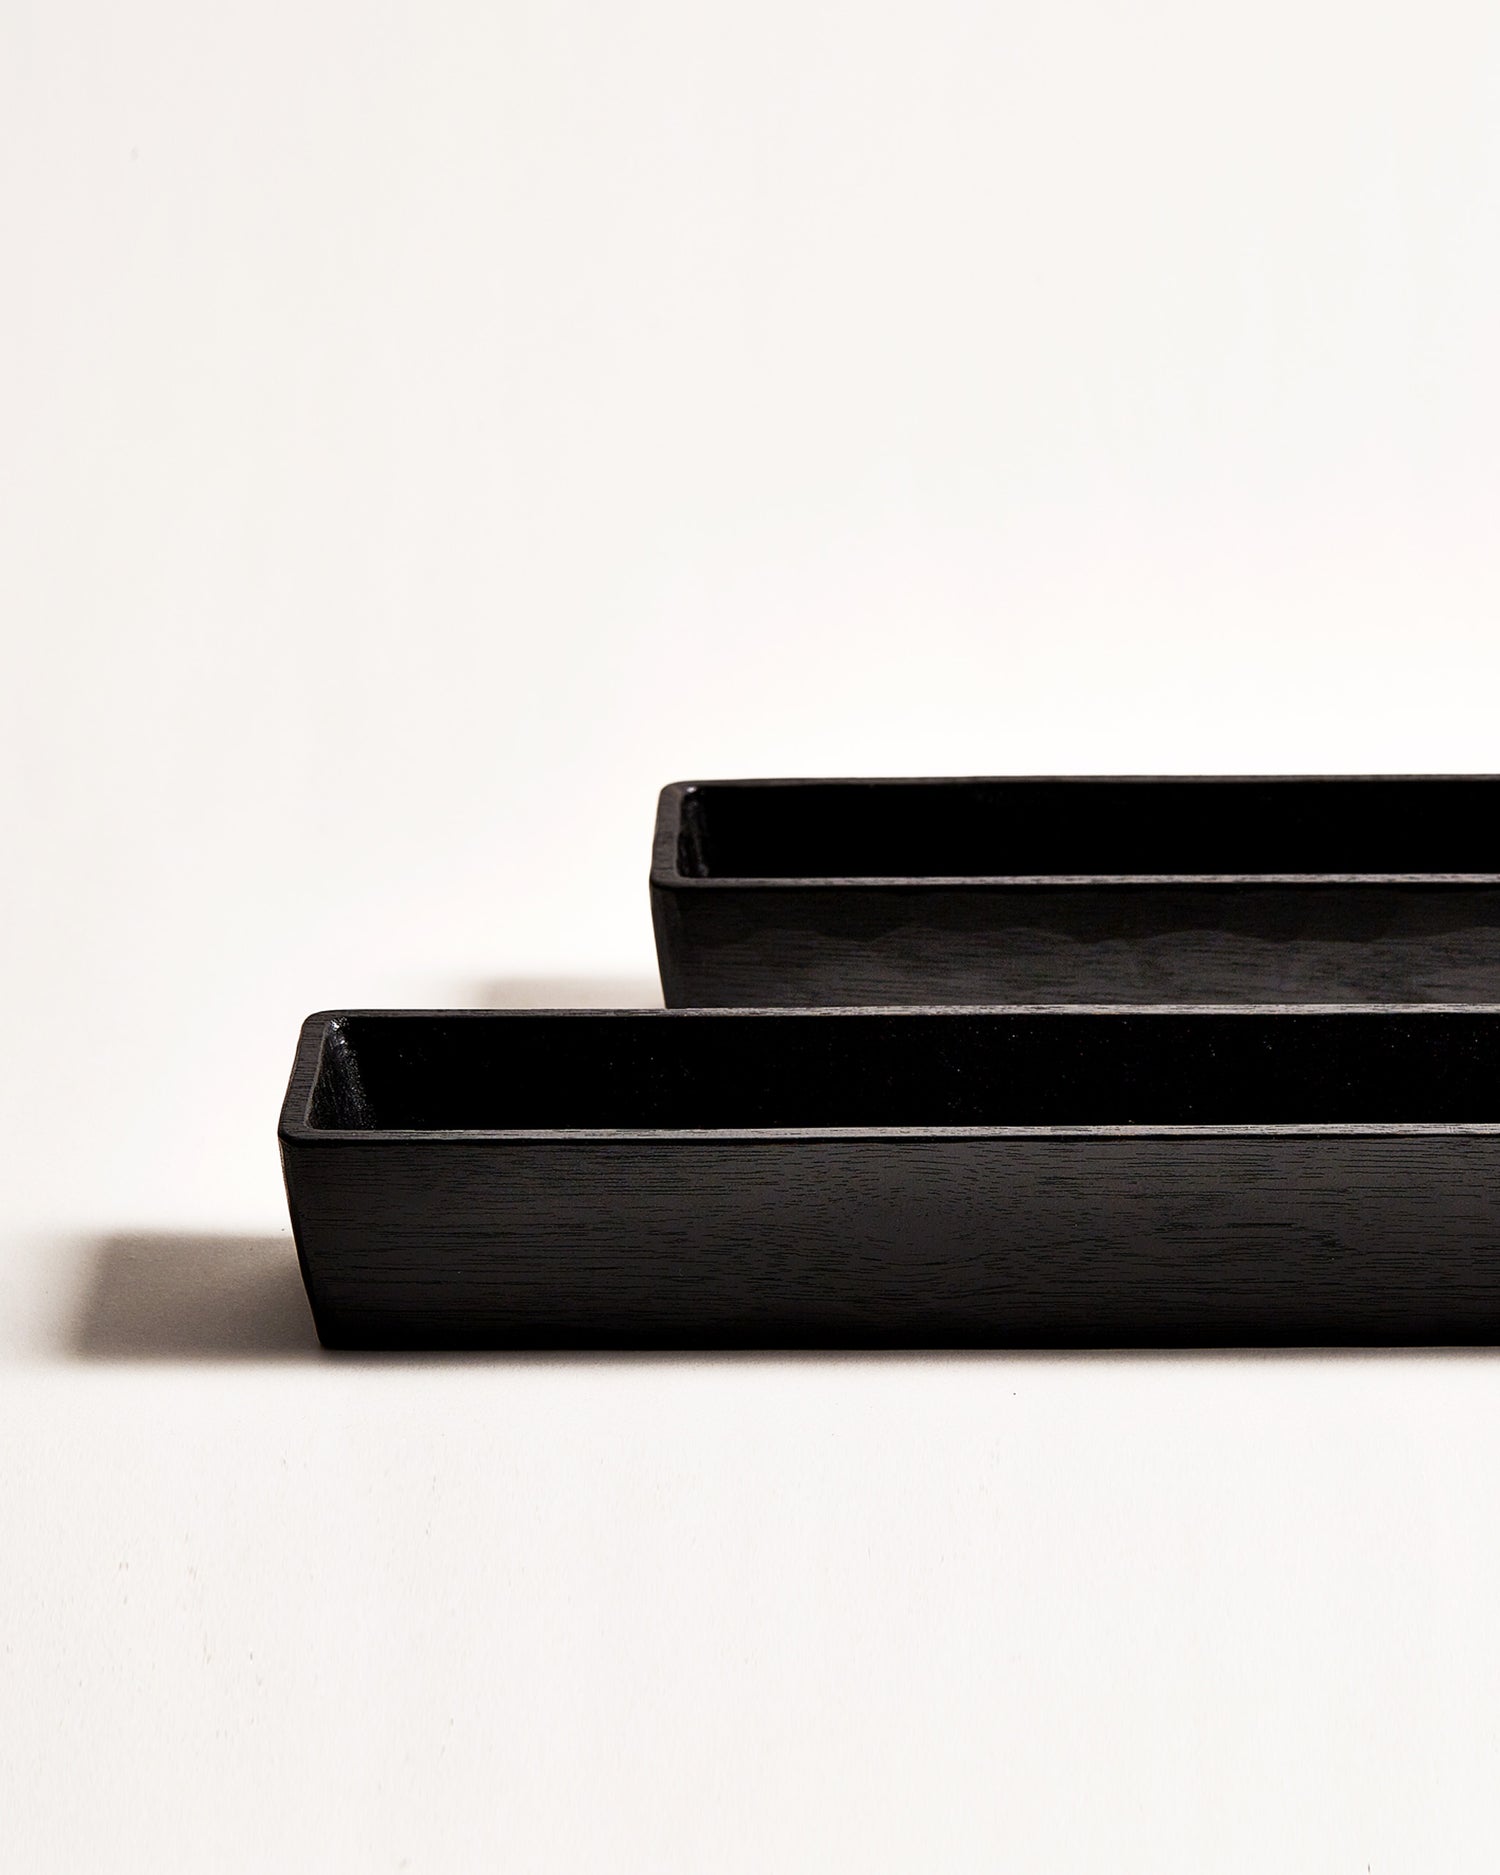 Cropped view of 2 staggered Chopsticks Holders by Ryuji Mitani against white-gray background.